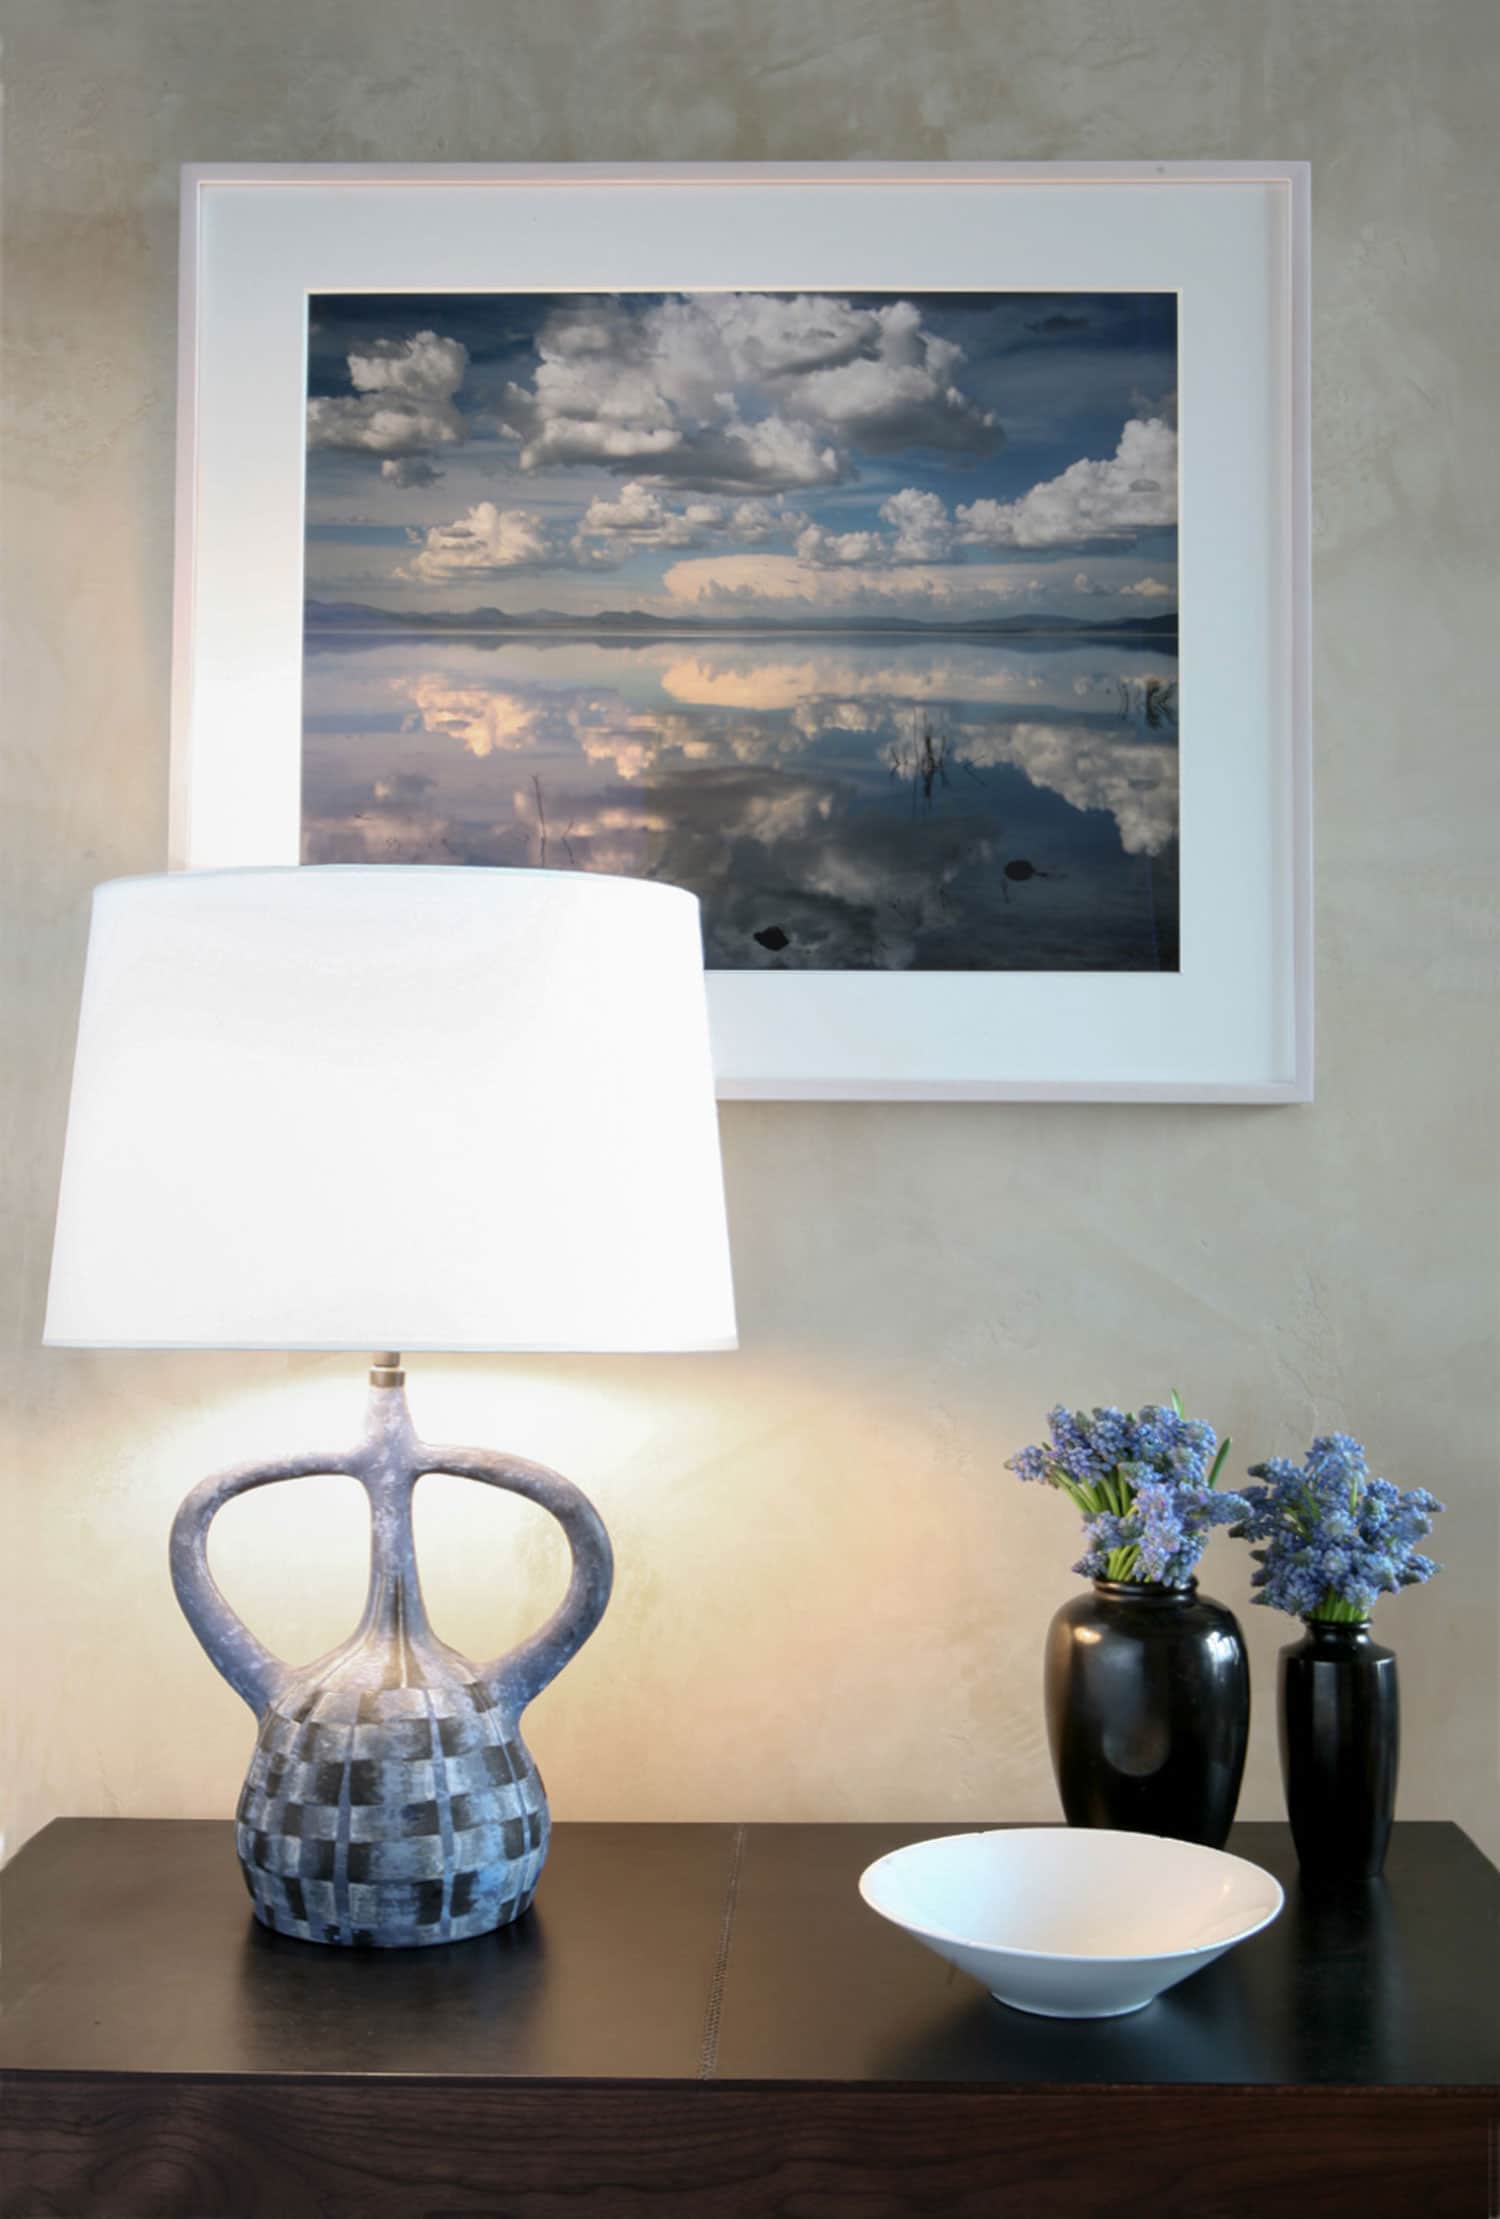 In this Aspen residence designed by Carol Egan, this image shows a detail shot of a French ceramic table lamp seen here on a wooden console table in the entry foyer with a skyscape photograph framed and hung on the venetian plaster walls.